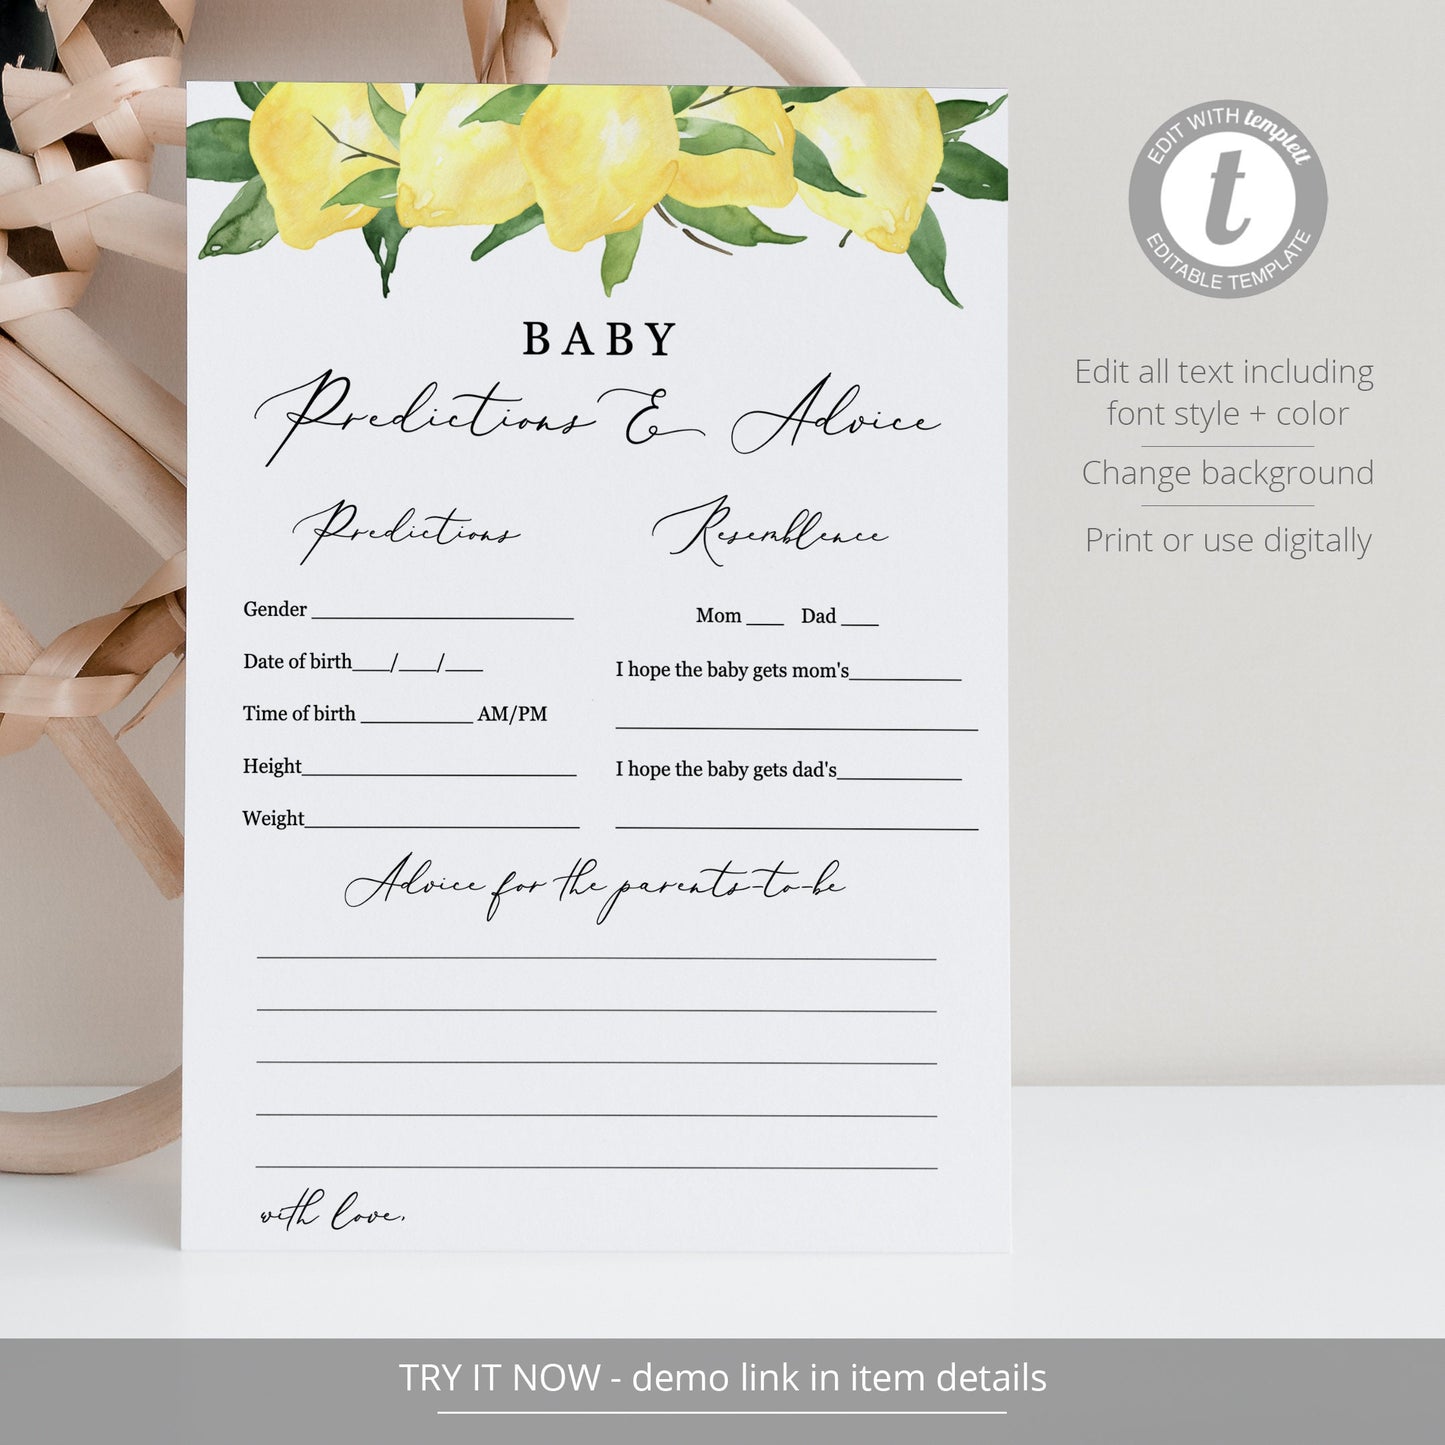 Editable Baby Predictions and Advice Card Lemon Baby Shower Games Citrus Yellow Template